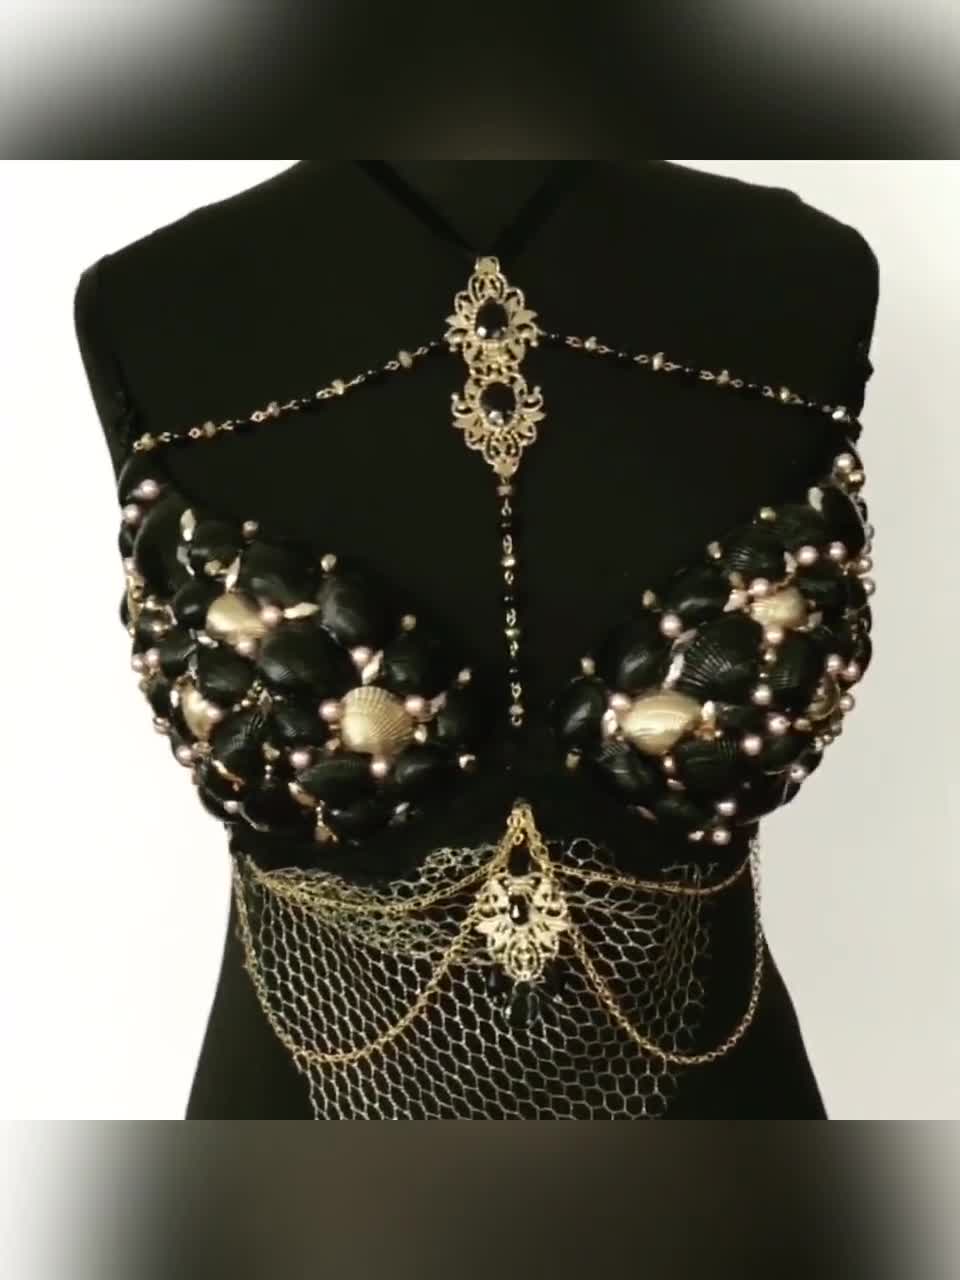 DIY Mermaid Inspired Rave Bra • Embellished with Pearls, Rhinestones, Gold  Chains, & Small-Medium Size Shells (Faux or Real).